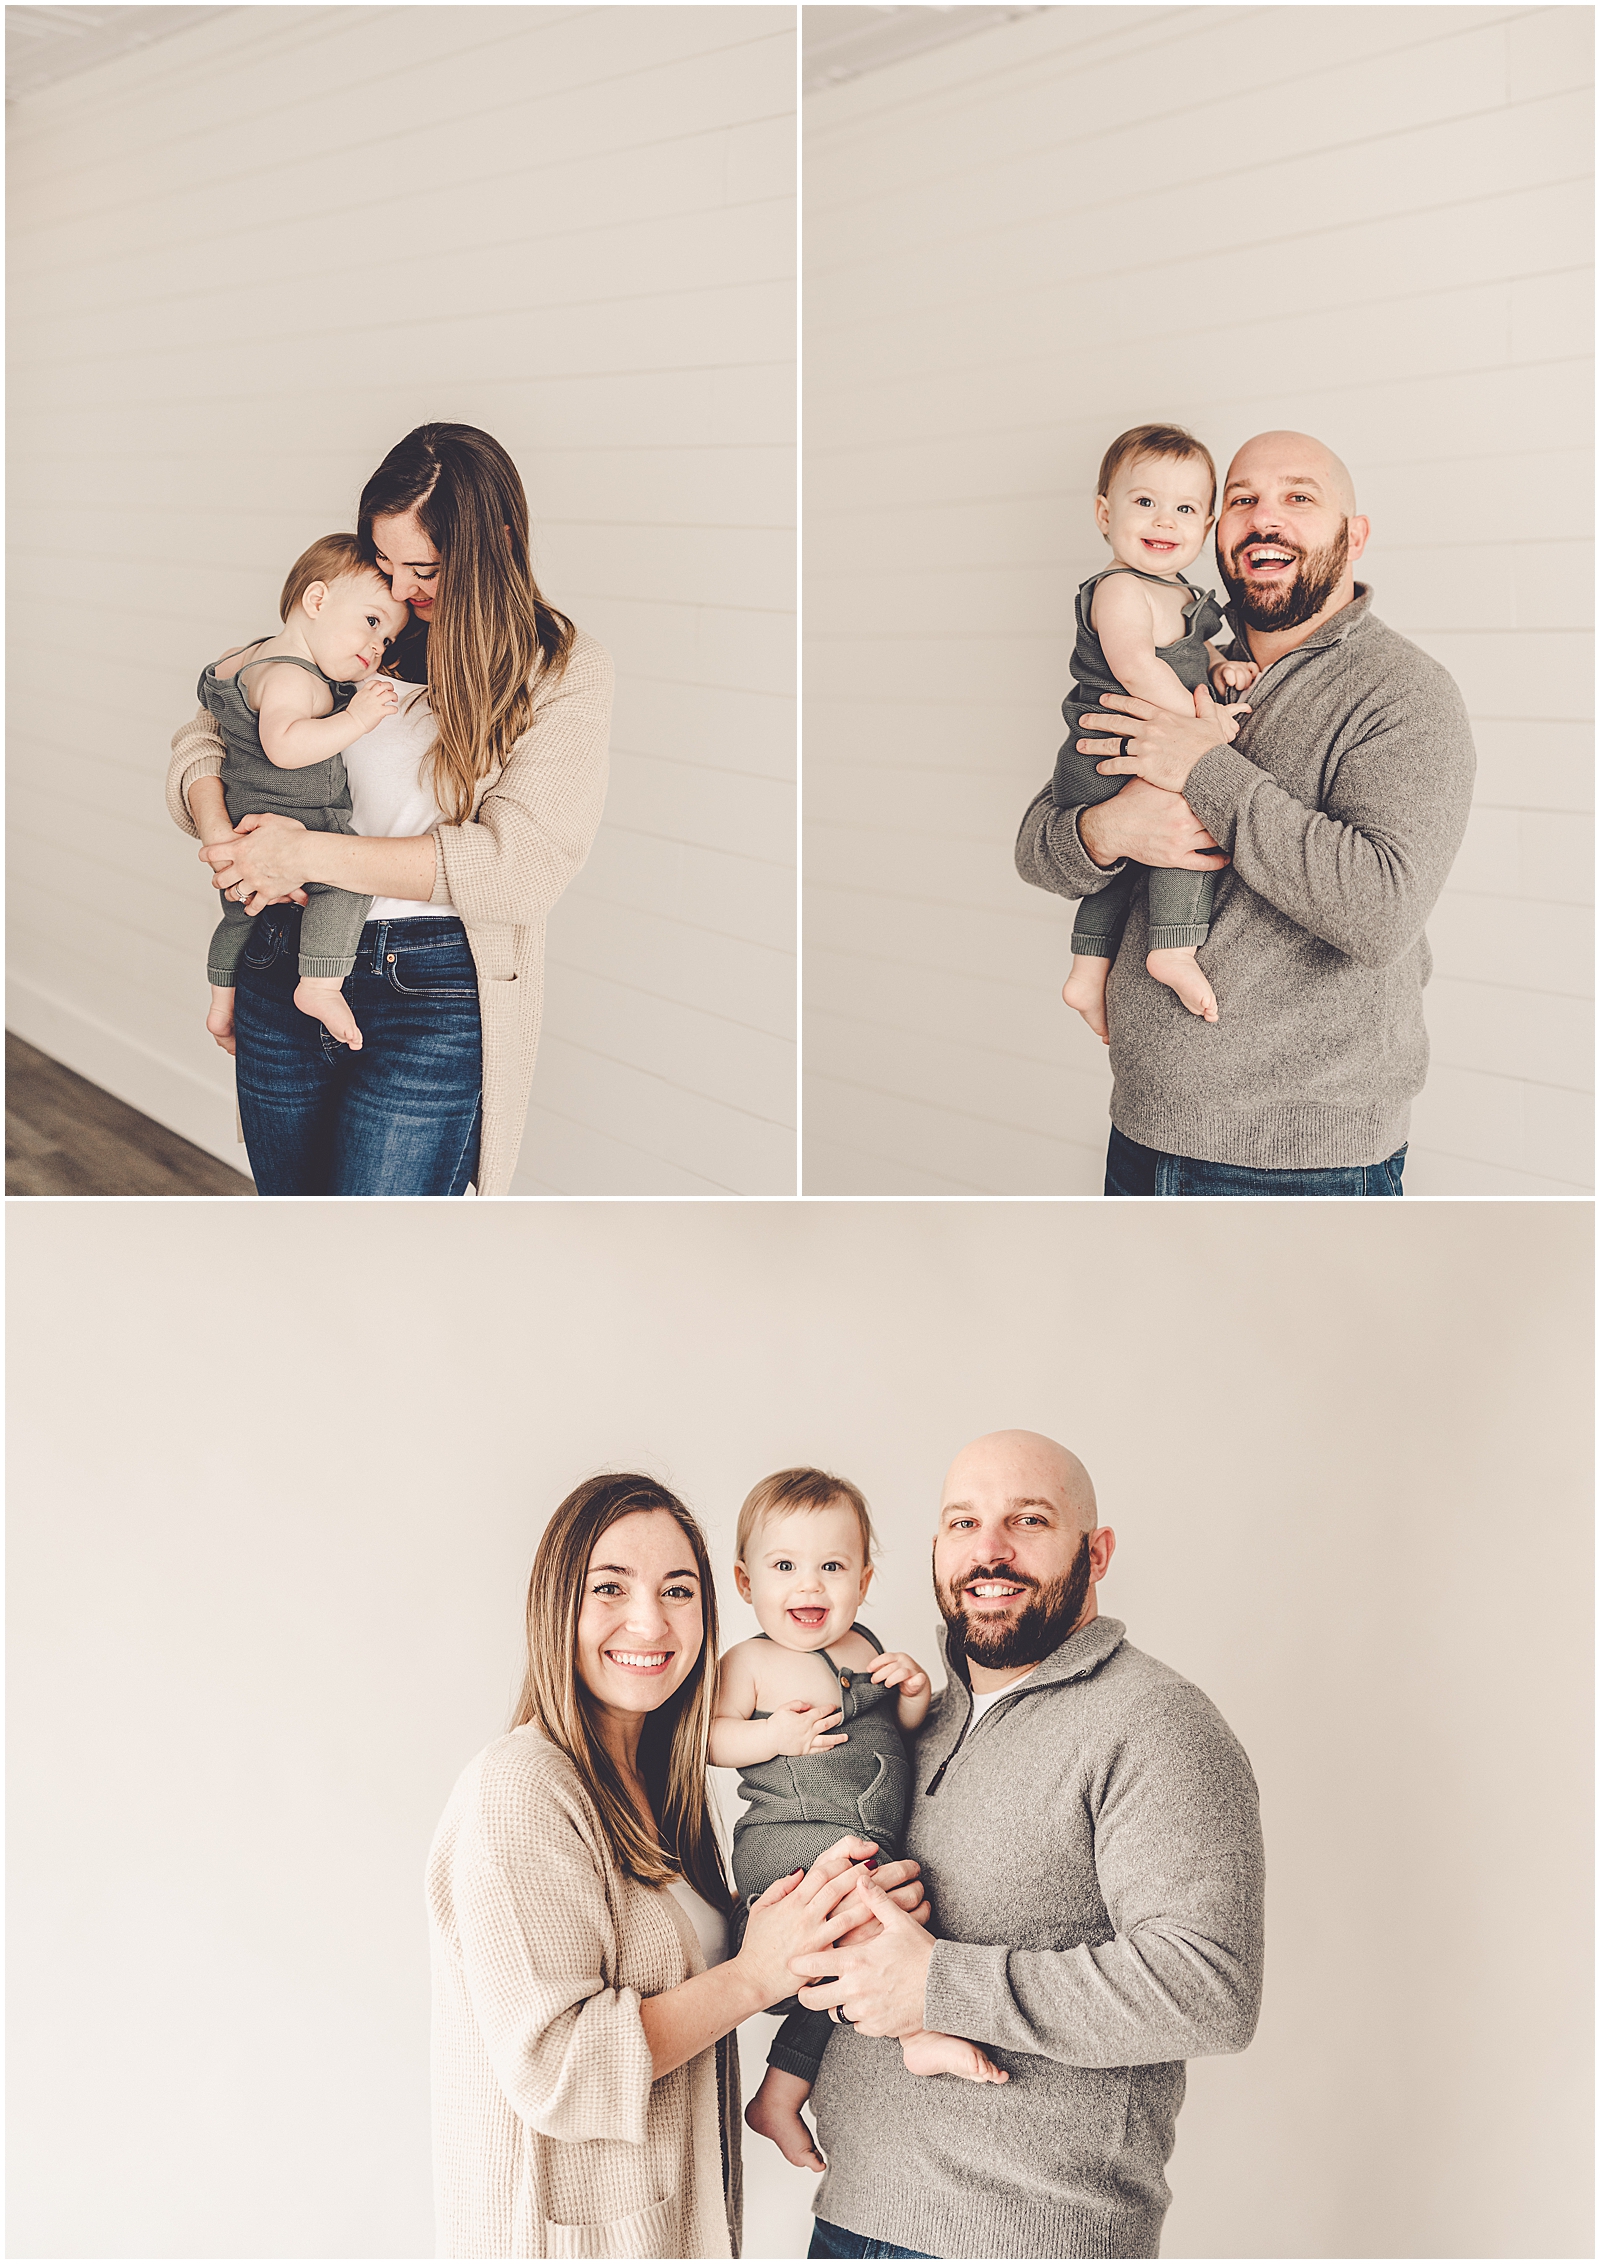 Family photography session with the DePaolo family at Kara Evans Photographer - Natural Light Studio Photographer in Kankakee, Illinois.